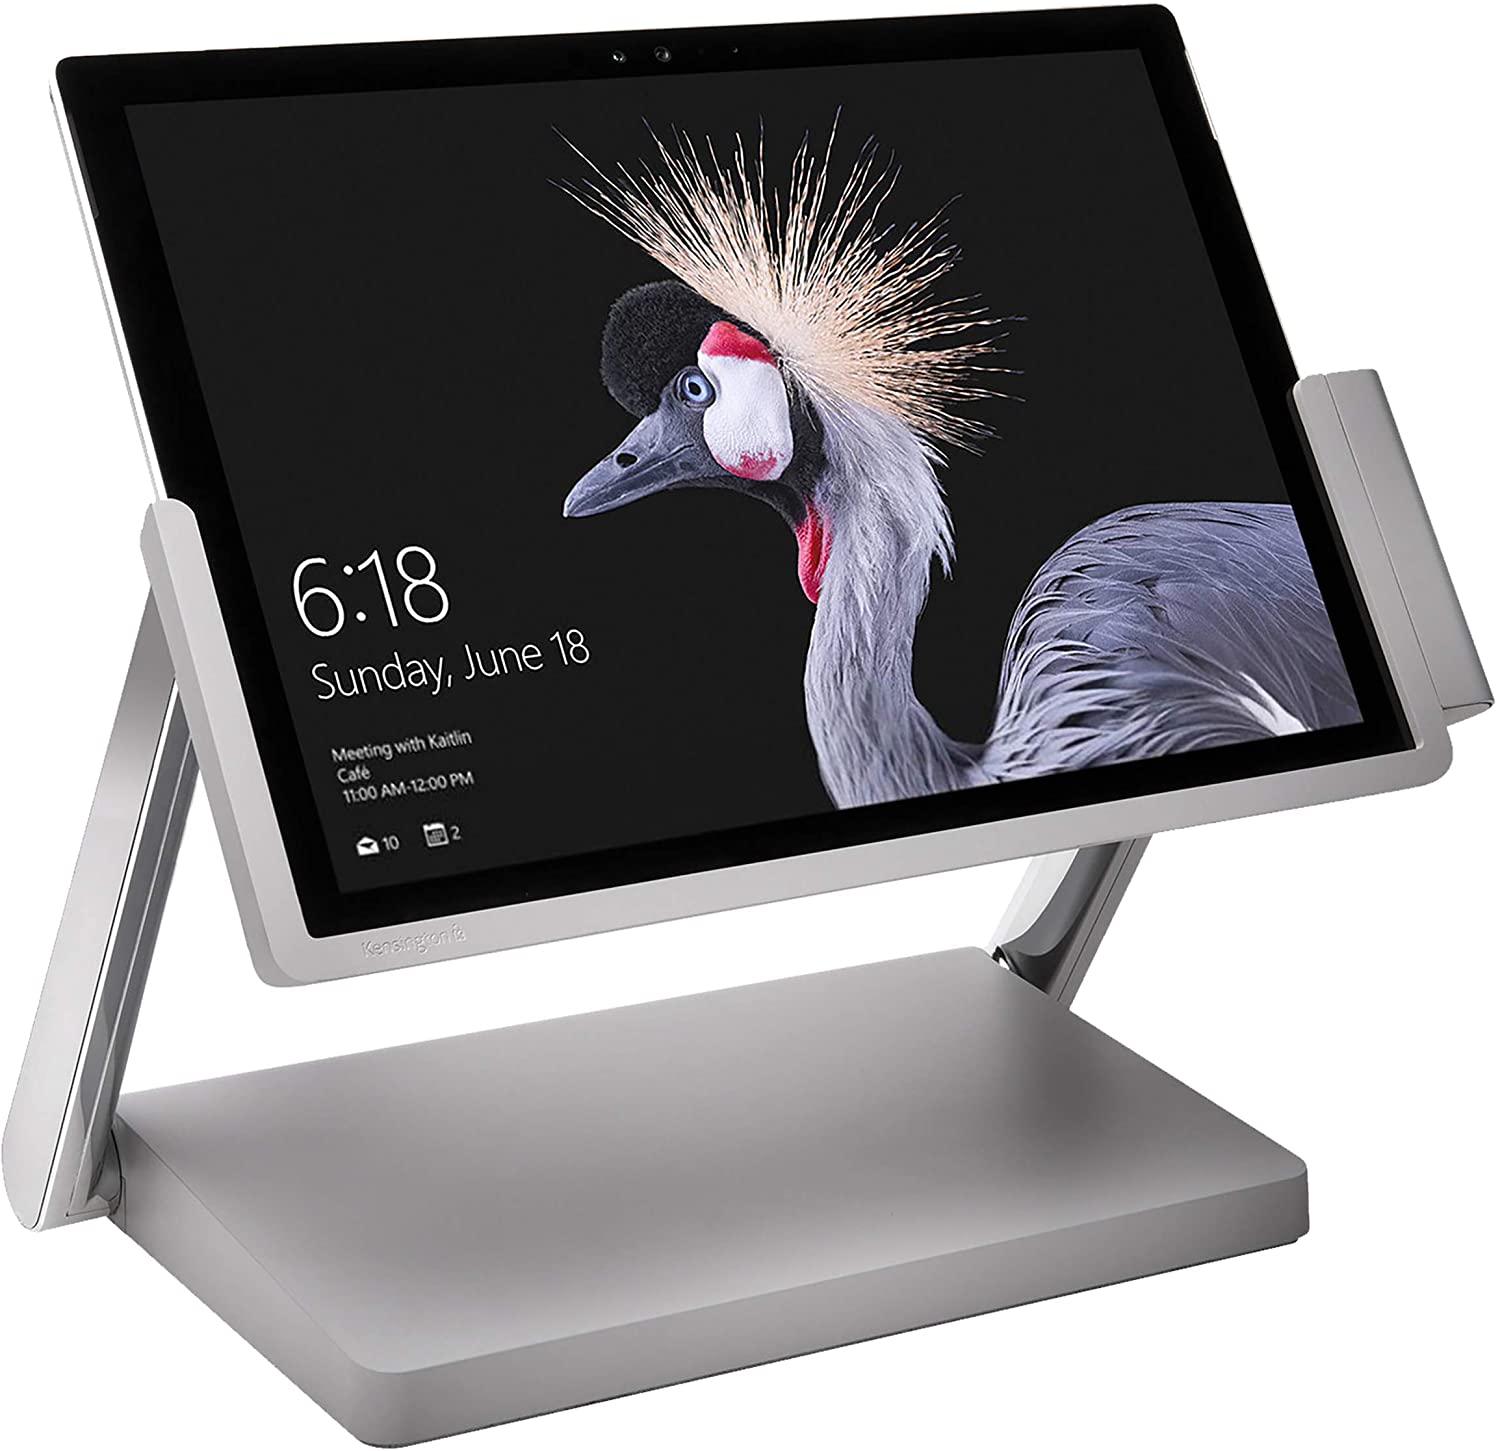 Kensington SD7000 Surface Pro Docking Station with Dual 4K Video Output